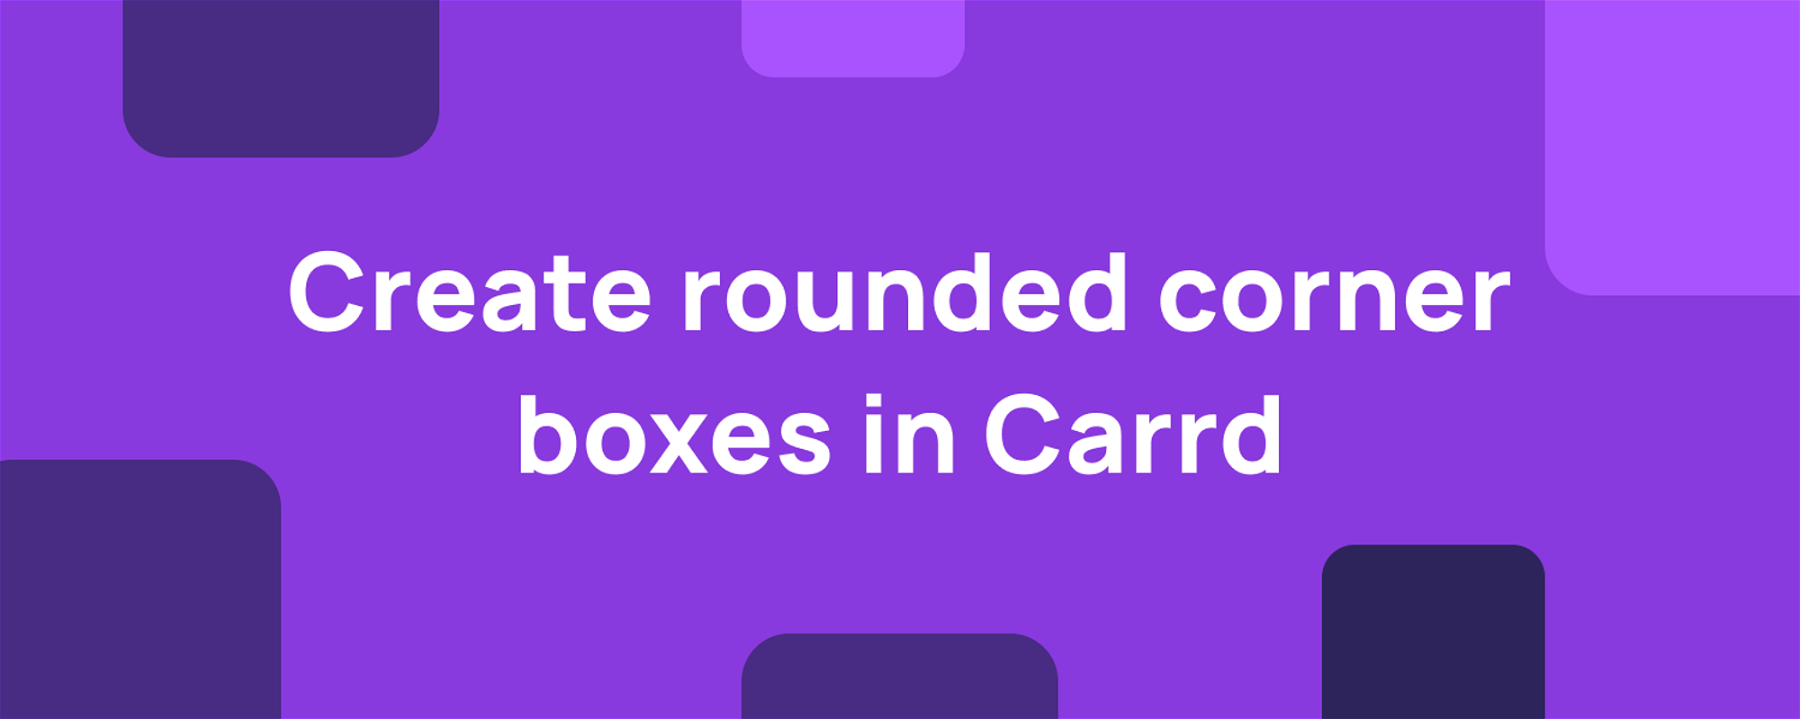 Create rounded corner boxes in Carrd